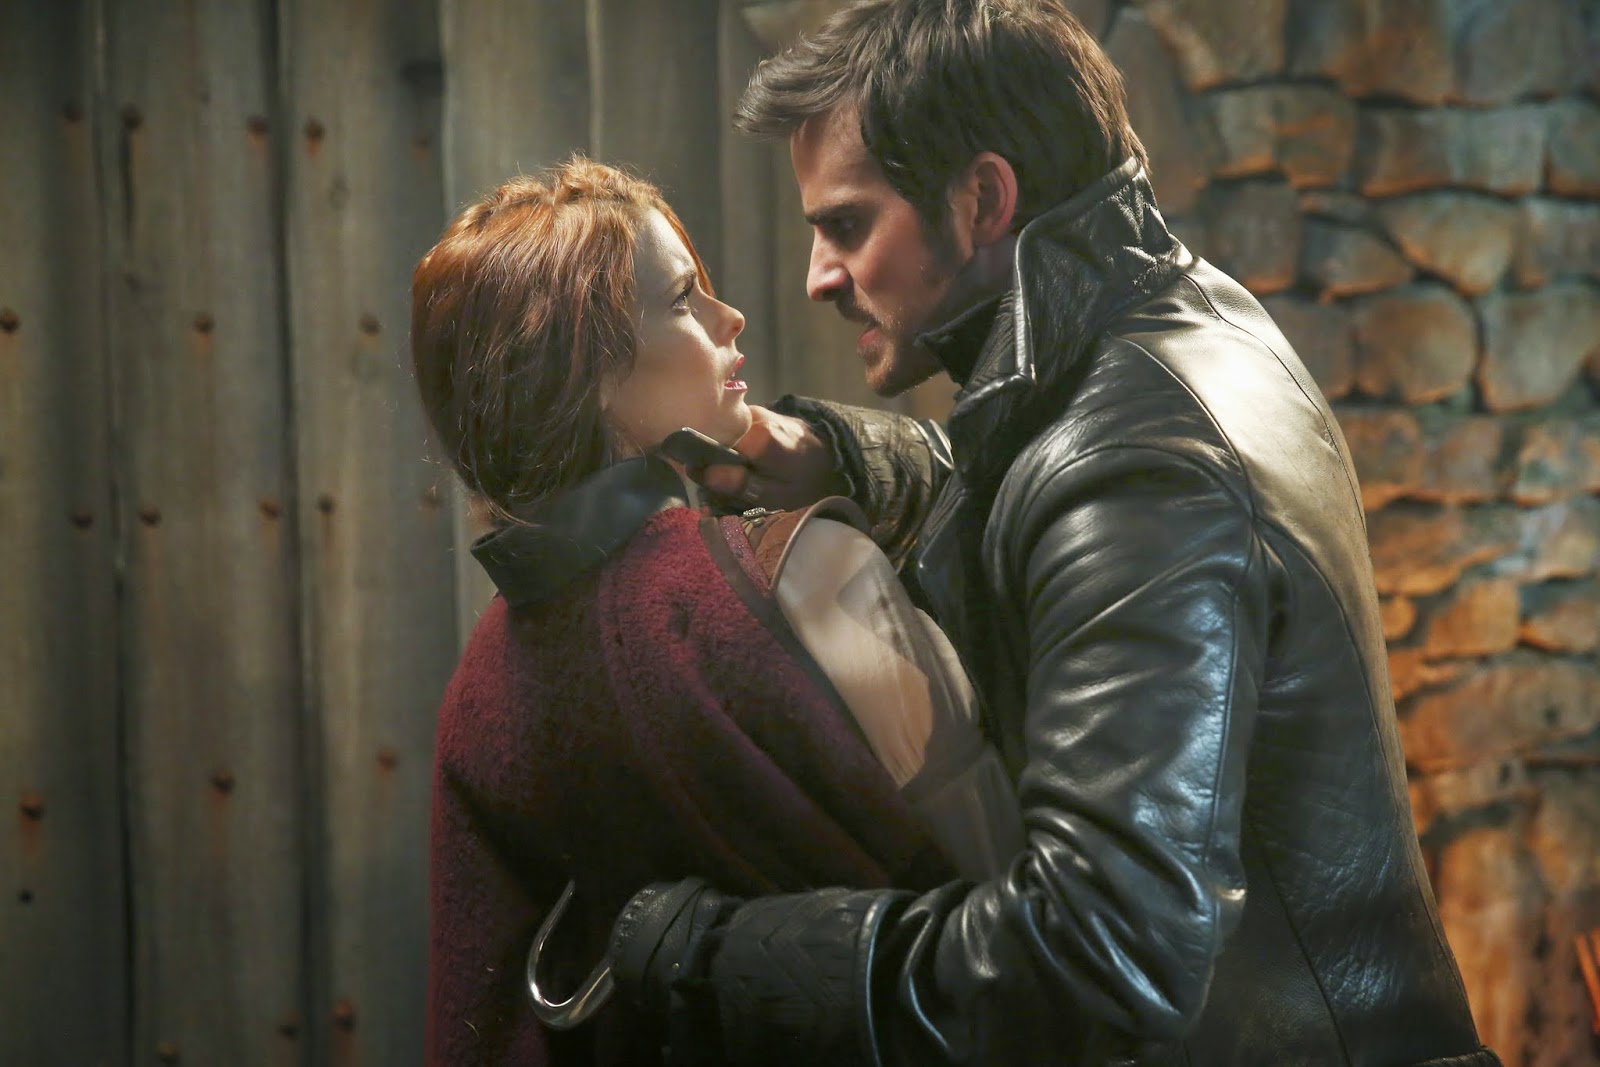 POLL: What was your favorite scene from Once upon a Time 3.17 "The Jolly Roger"?